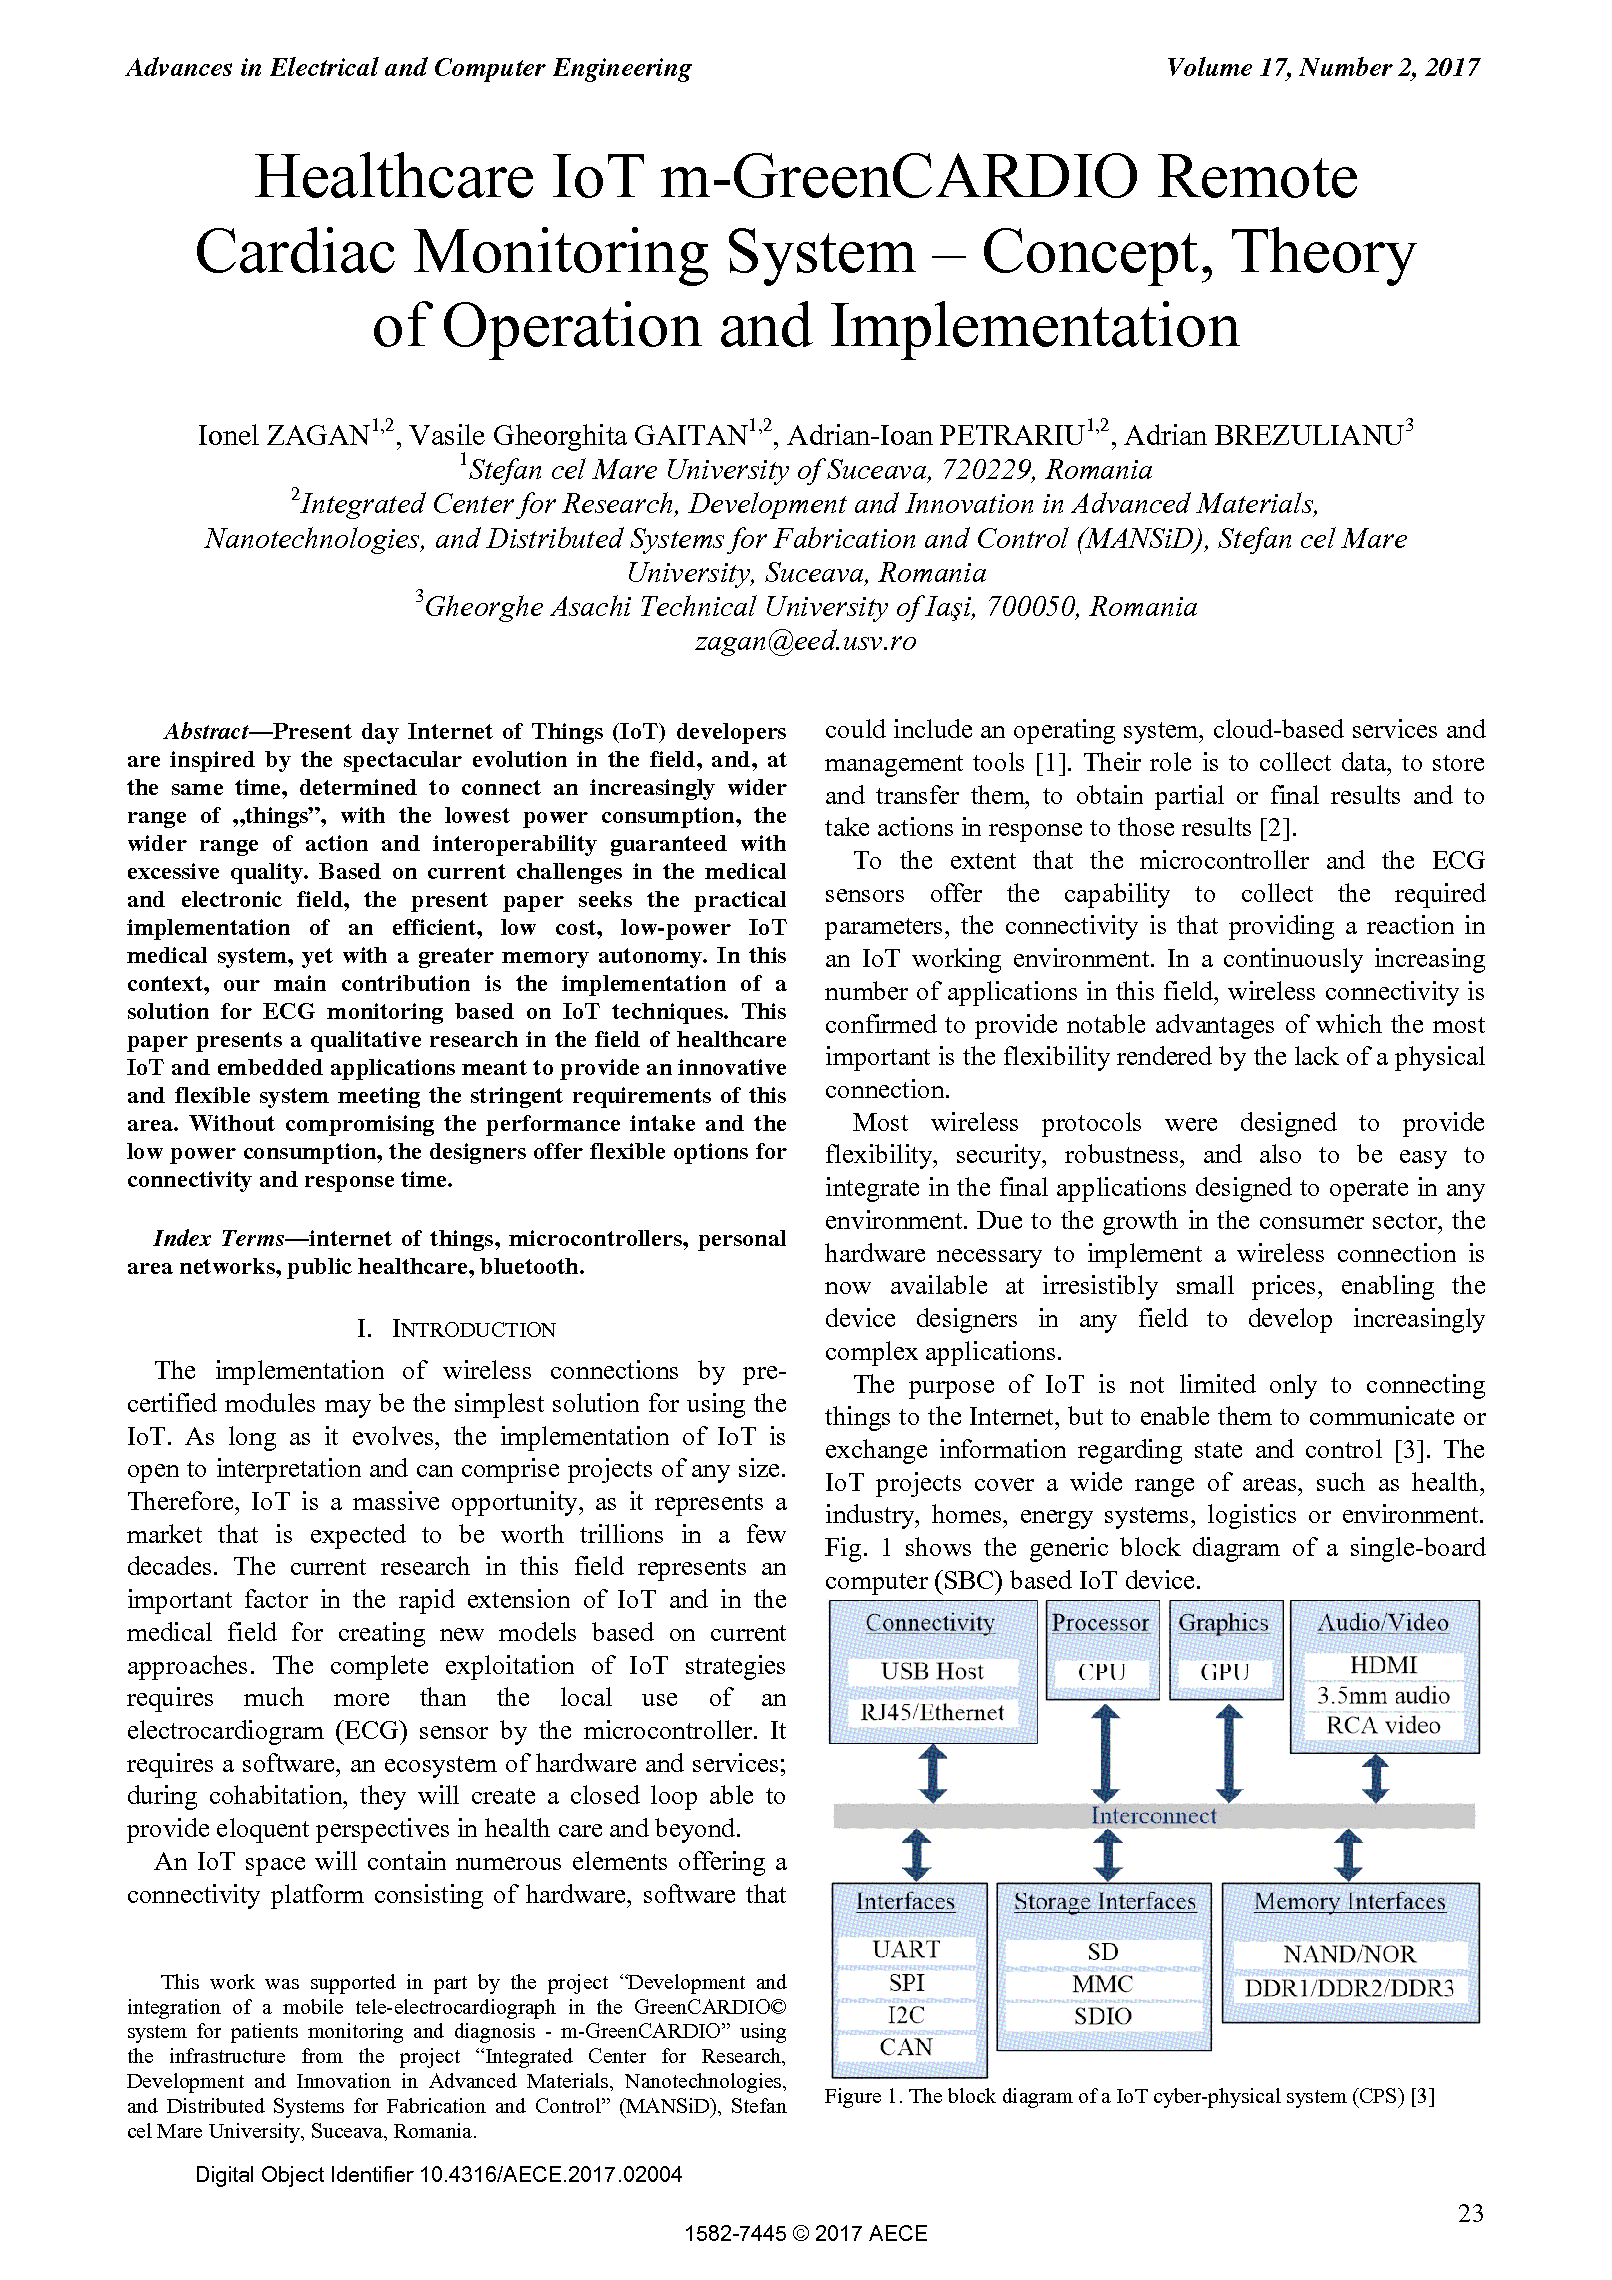 PDF Quickview for paper with DOI:10.4316/AECE.2017.02004